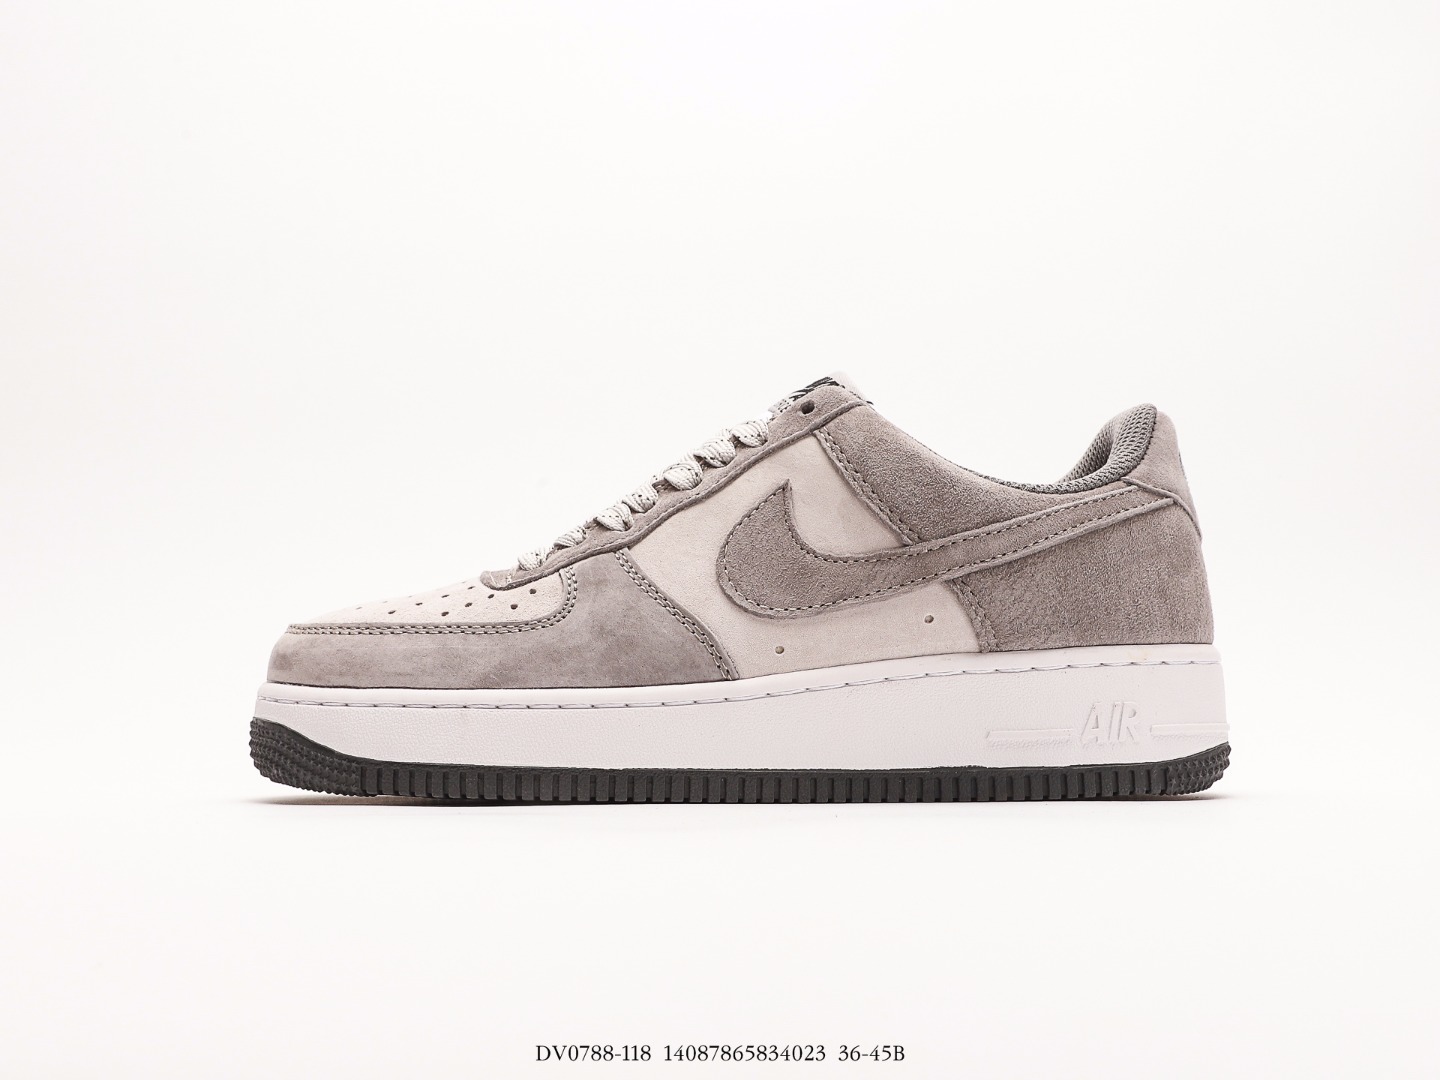 Nike Air Force 1 faible AF1 Force 1